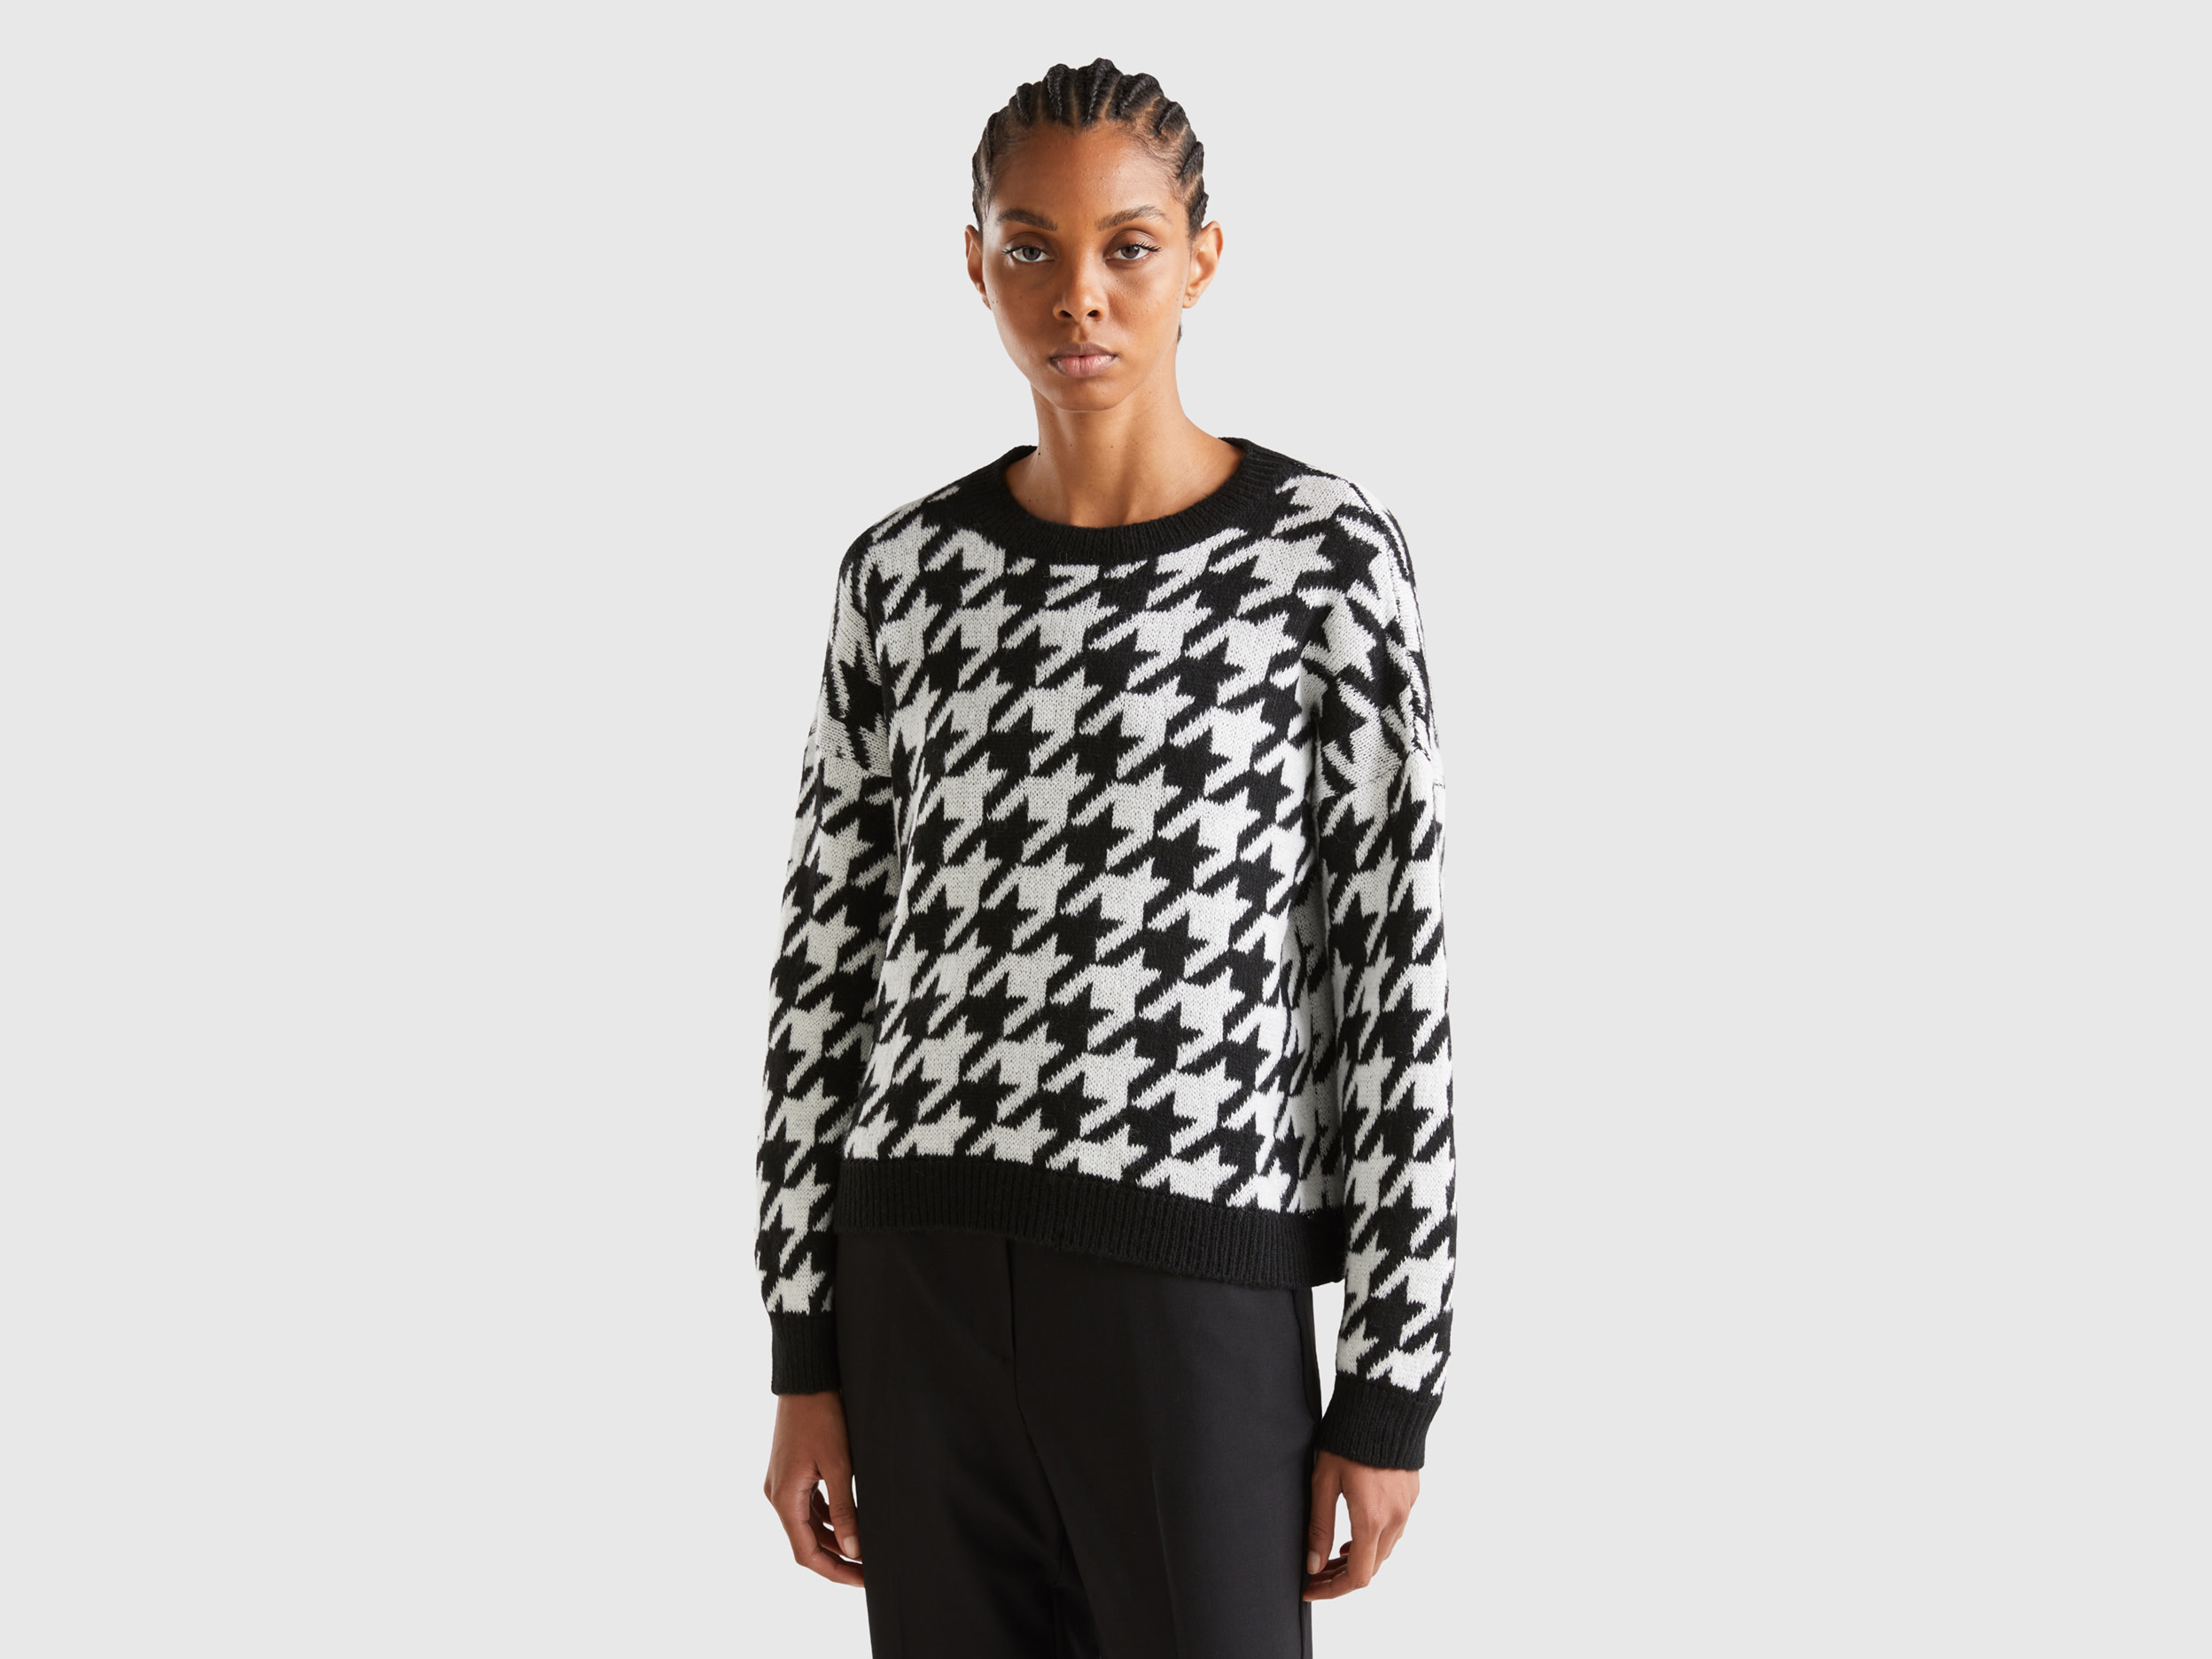 Benetton, Houndstooth Sweater, size M, Multi-color, Women